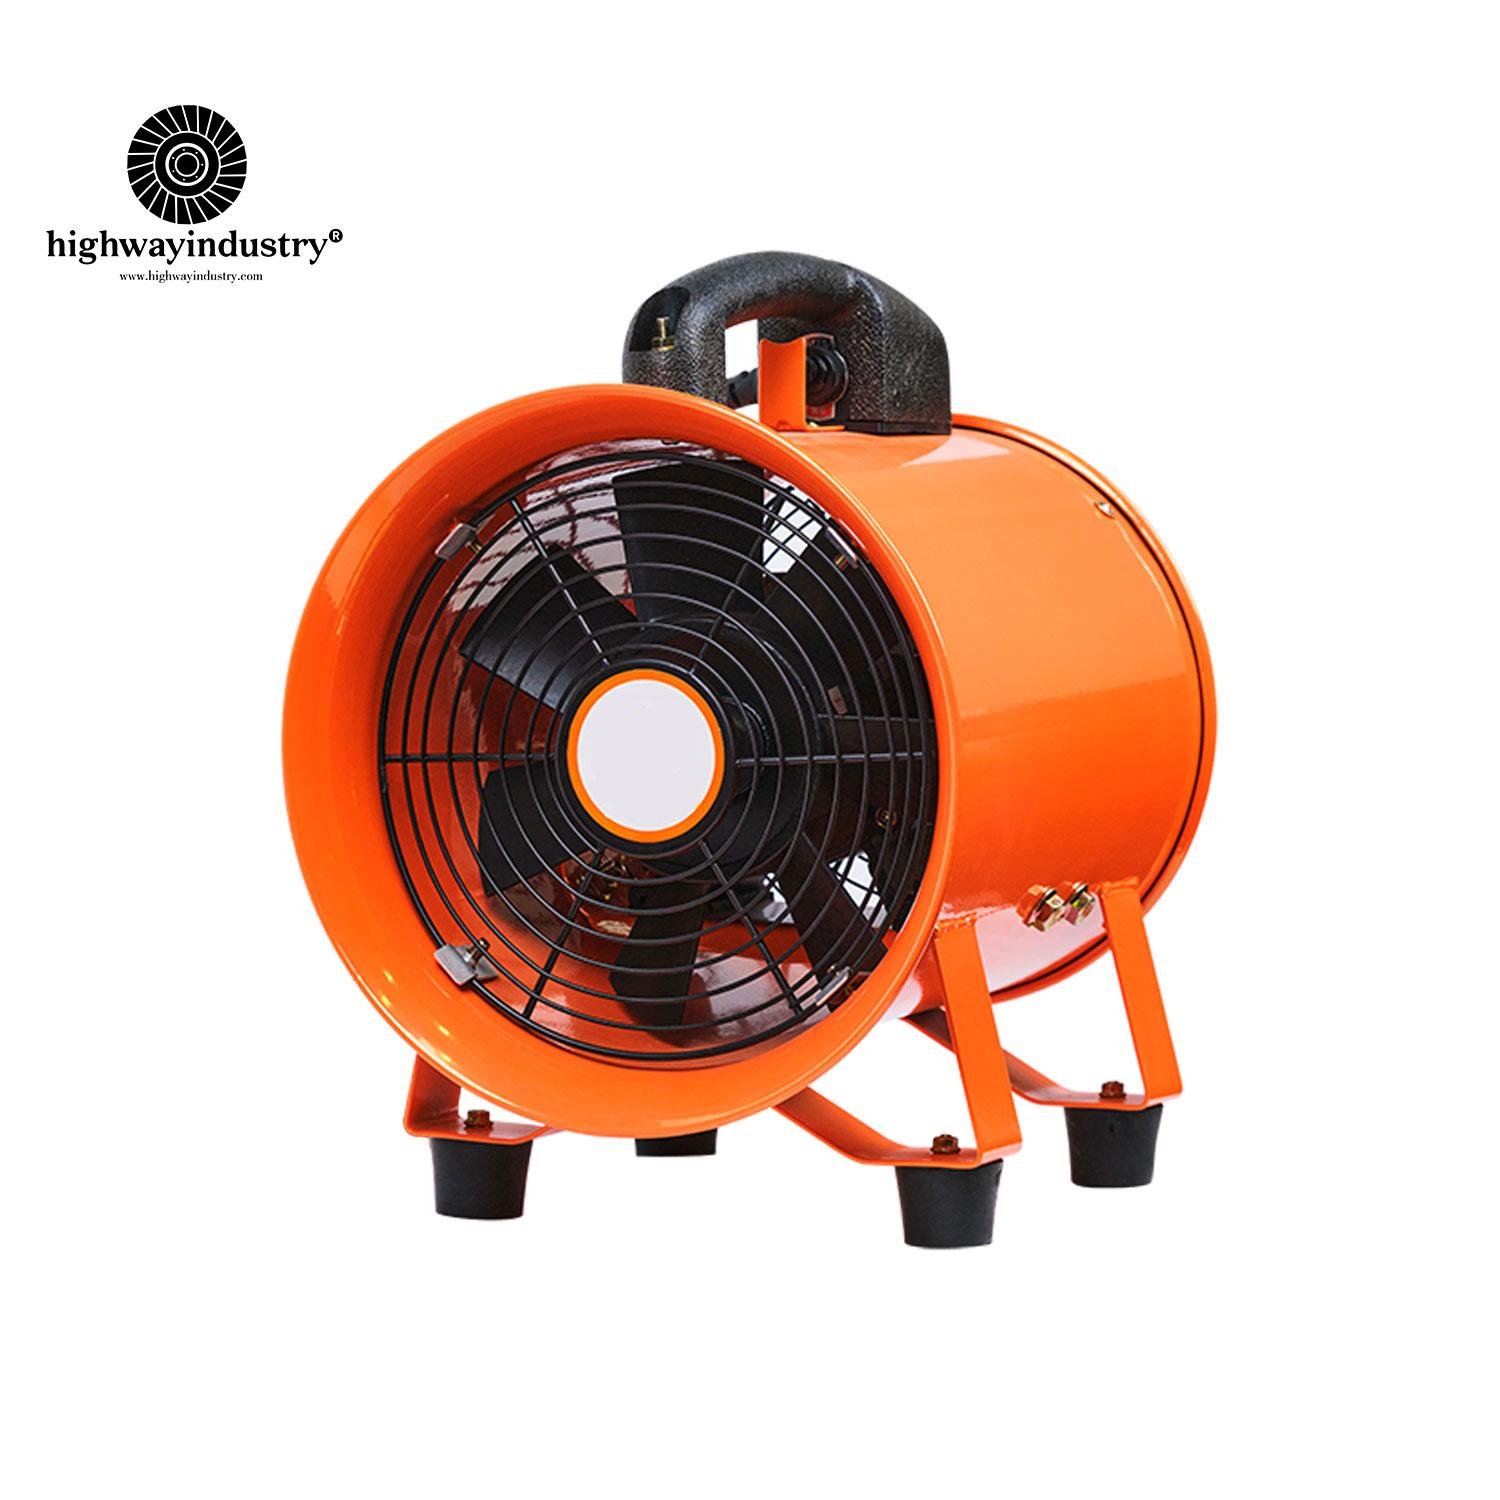 Highway Manufacturer explosion-proof portable turbine axial flow fan 2